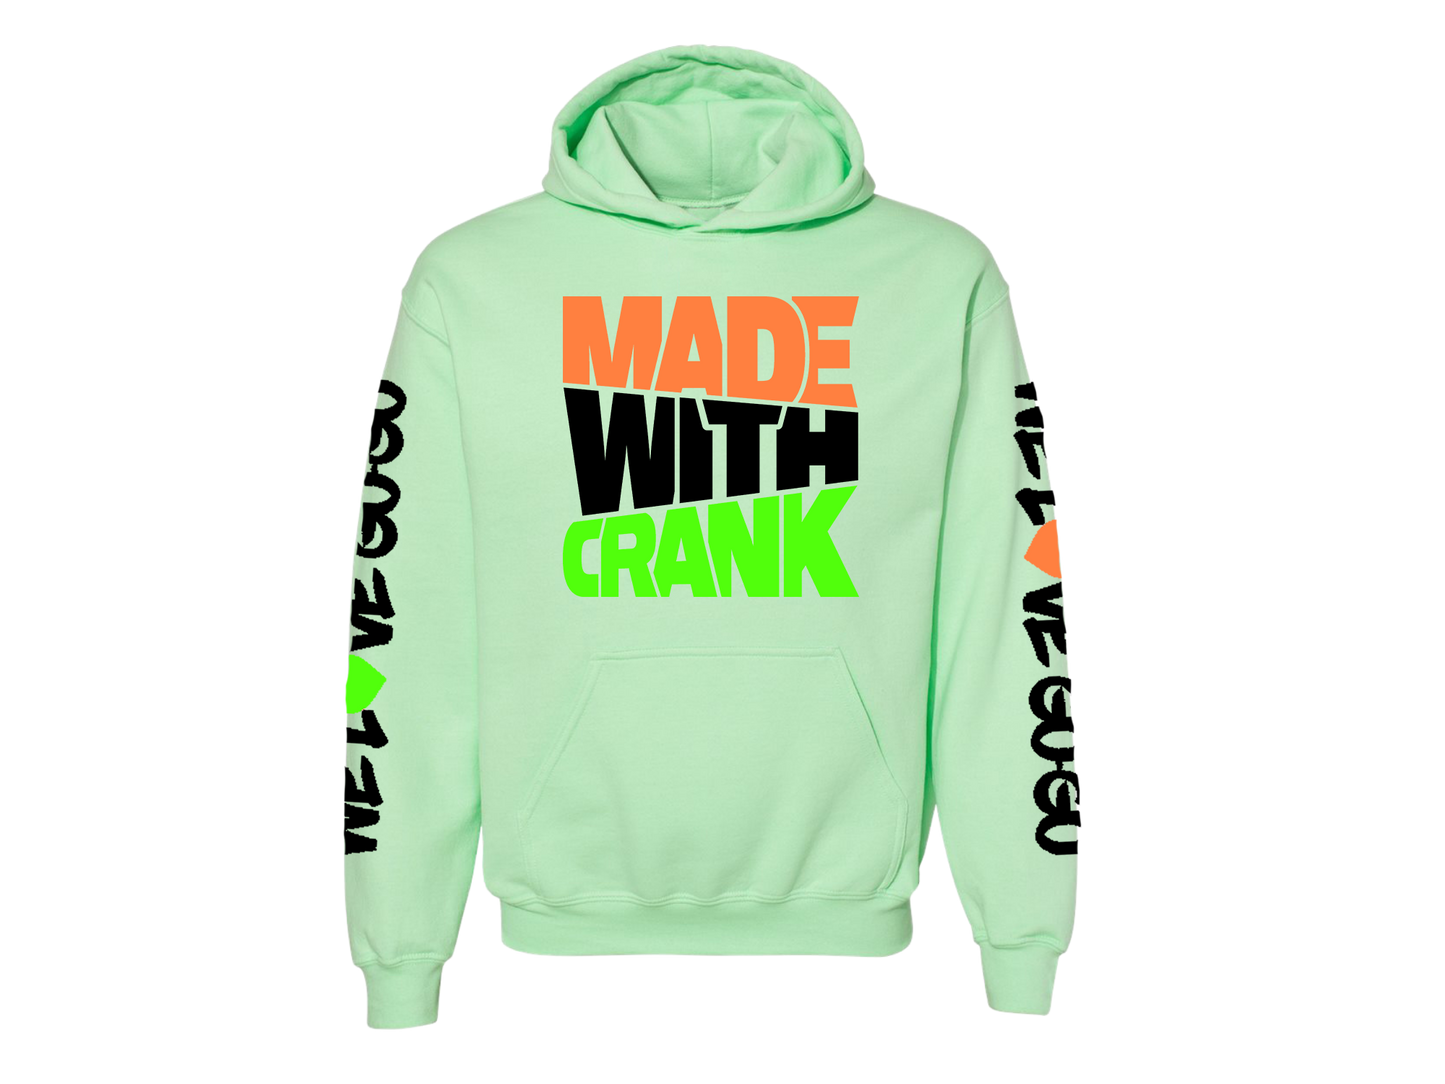 Made With Crank - Hoodie